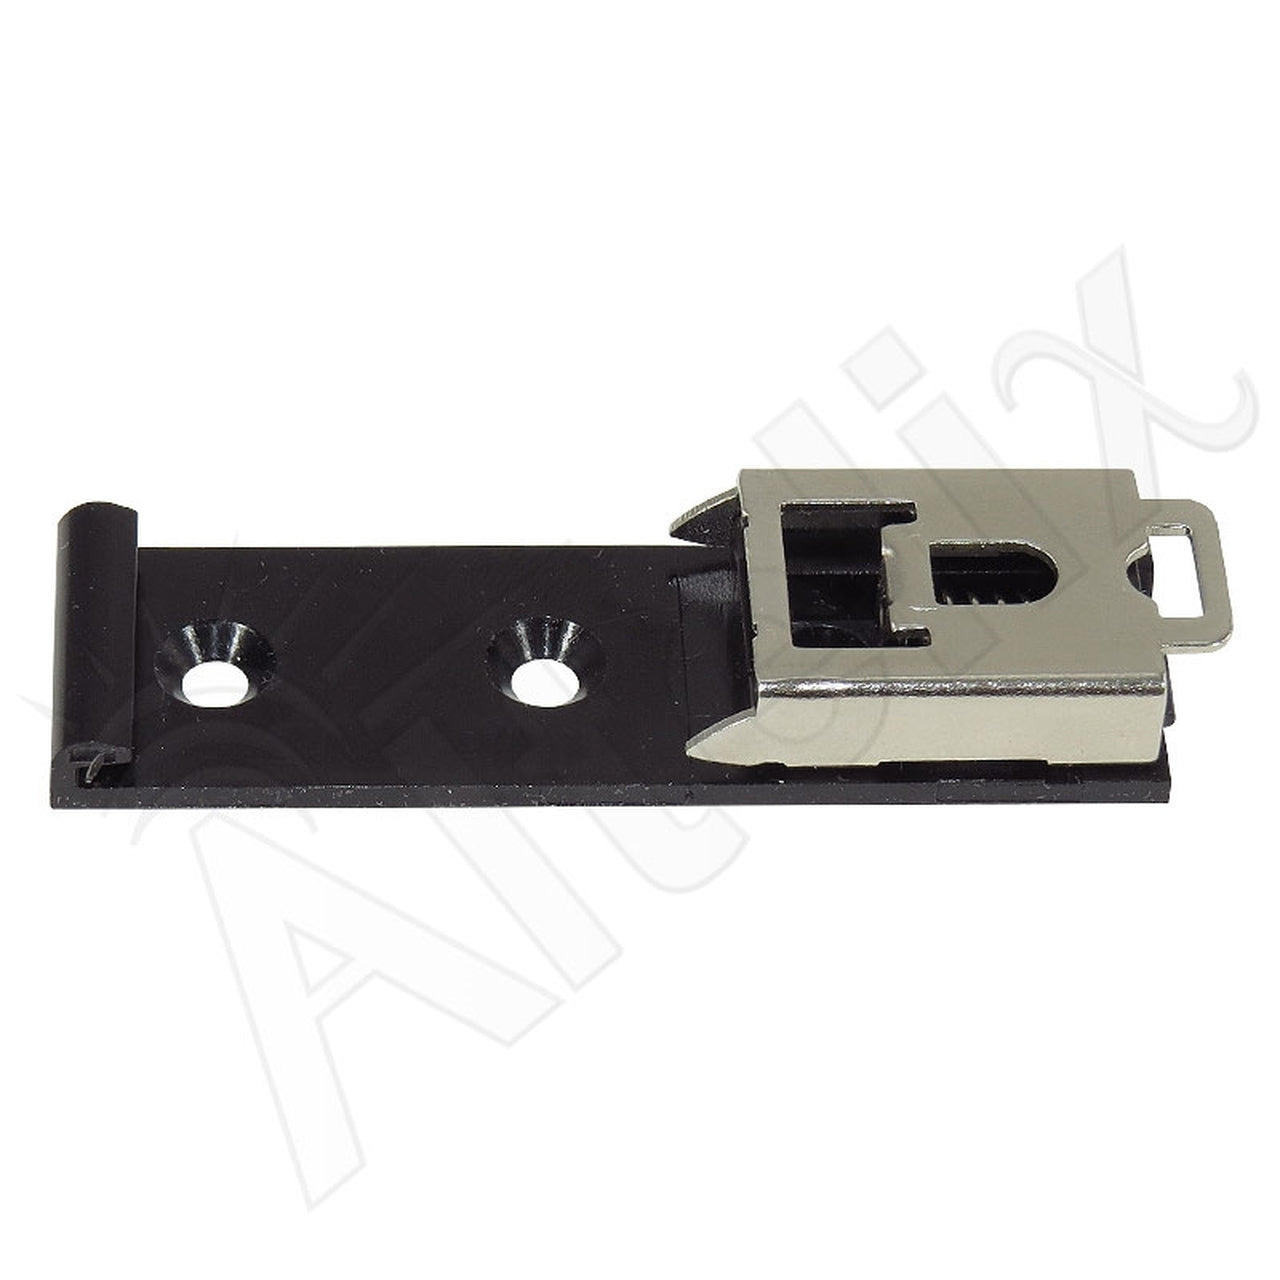 18mm Wide Spring-Loaded Clamp Type DIN Rail Mounting Clip for 35mm Top Hat Rail